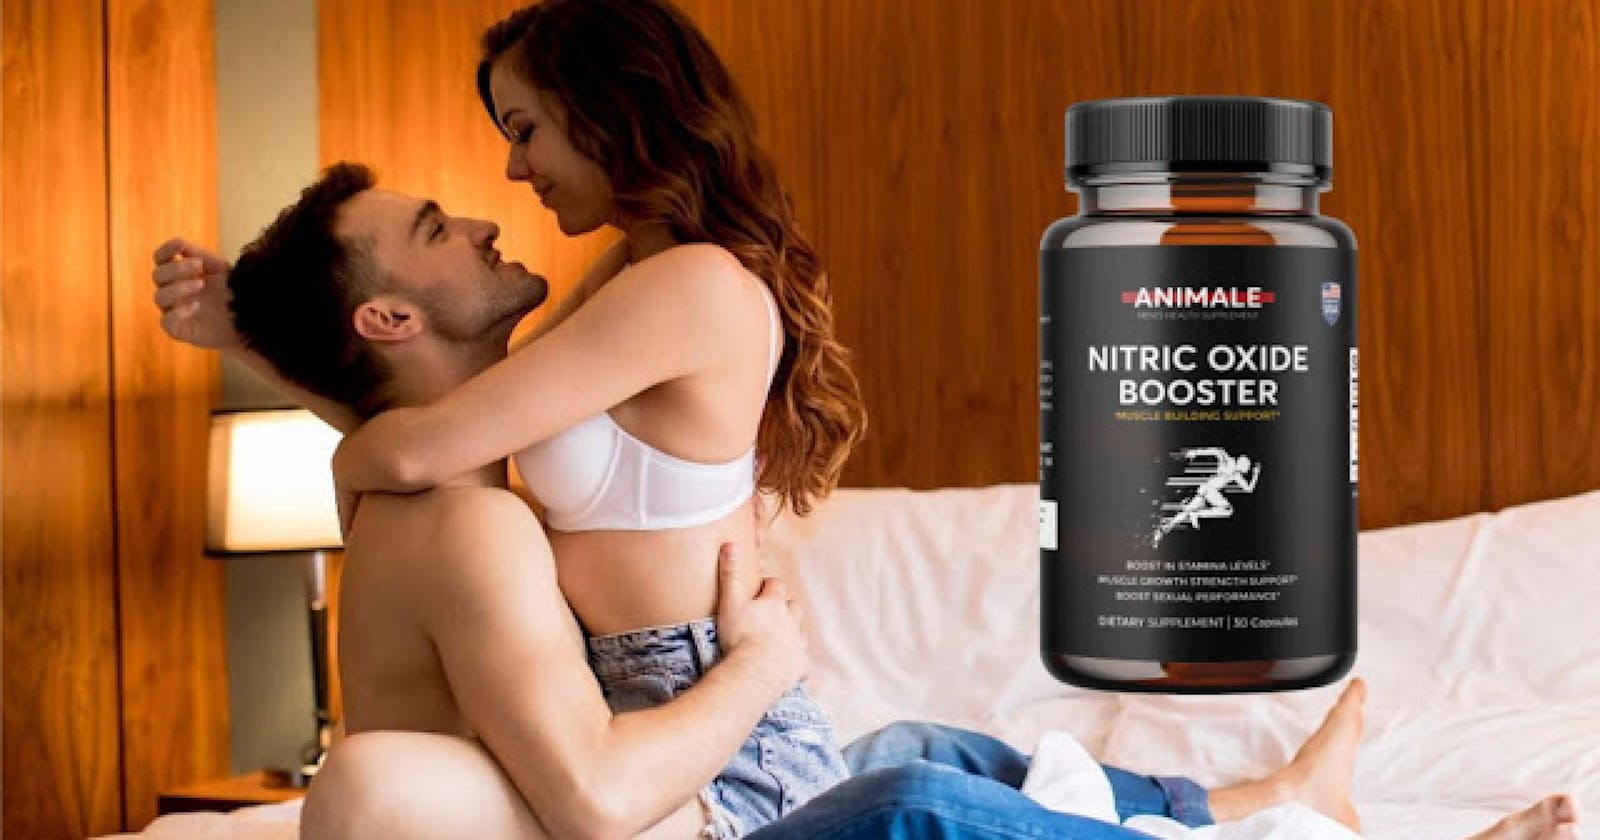 Animale Nitric Oxide Booster Reviews, Official Website, Cost & Buy In AU, NZ, USA & CA